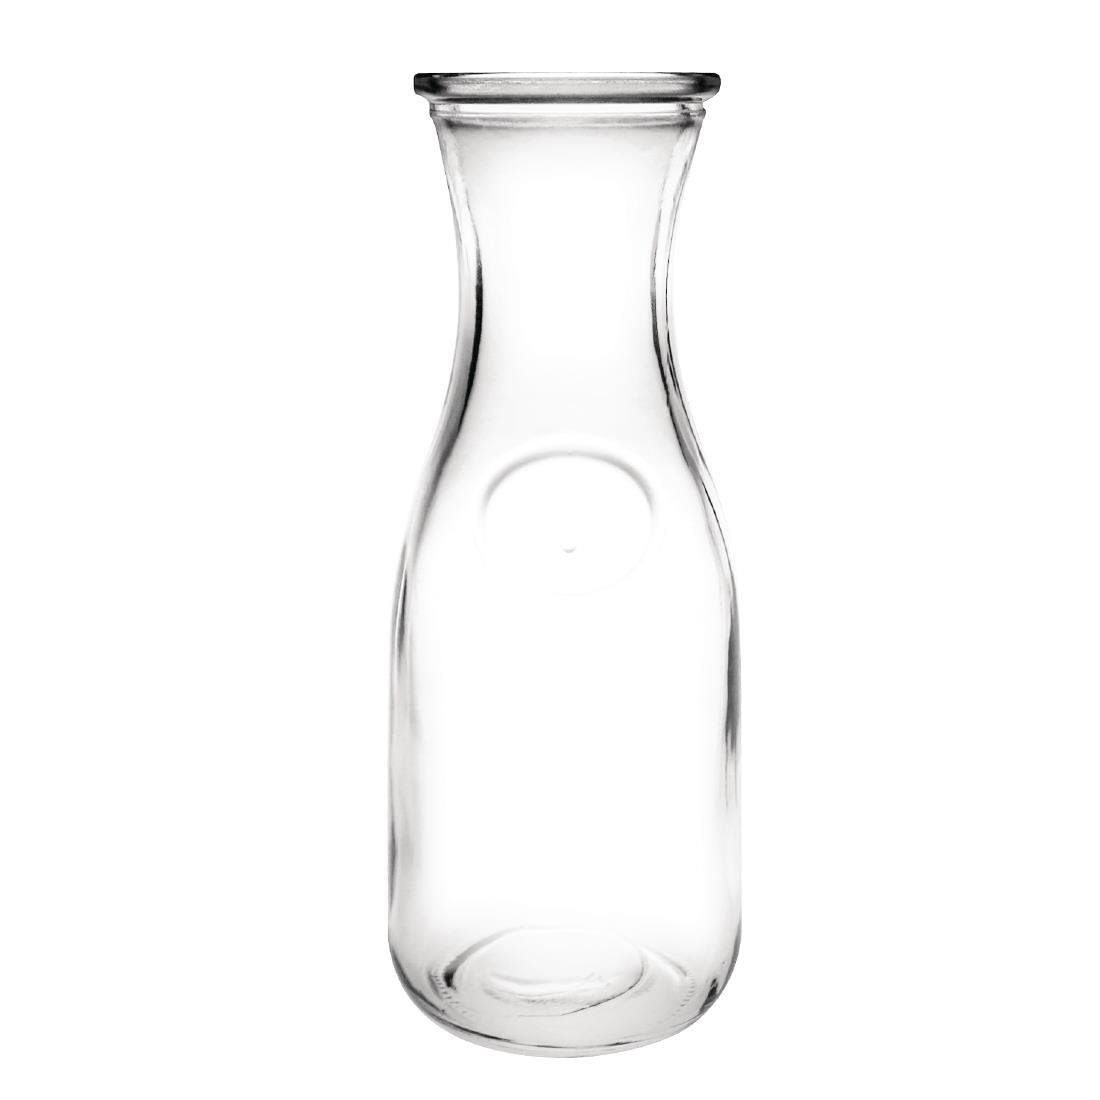 Olympia Glass Carafe 500ml (Pack of 6) - GM583  - 1